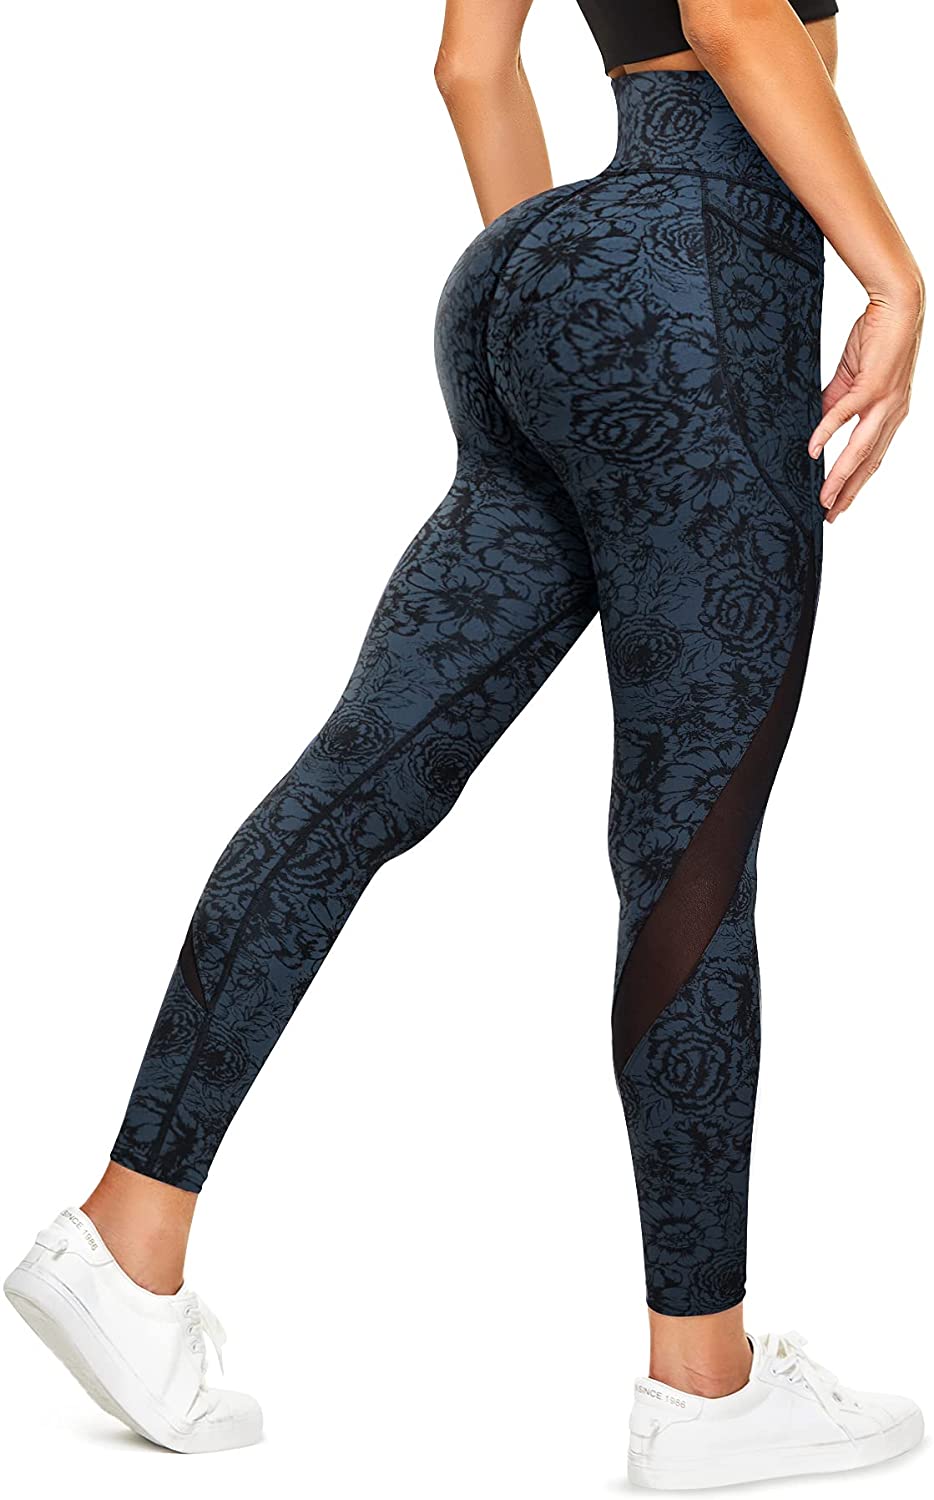  TrainingGirl Mesh Leggings for Women High Waisted Yoga Pants Workout  Running Printed Leggings Gym Sports Tights with Pockets (Black, 3X-Large) :  Clothing, Shoes & Jewelry